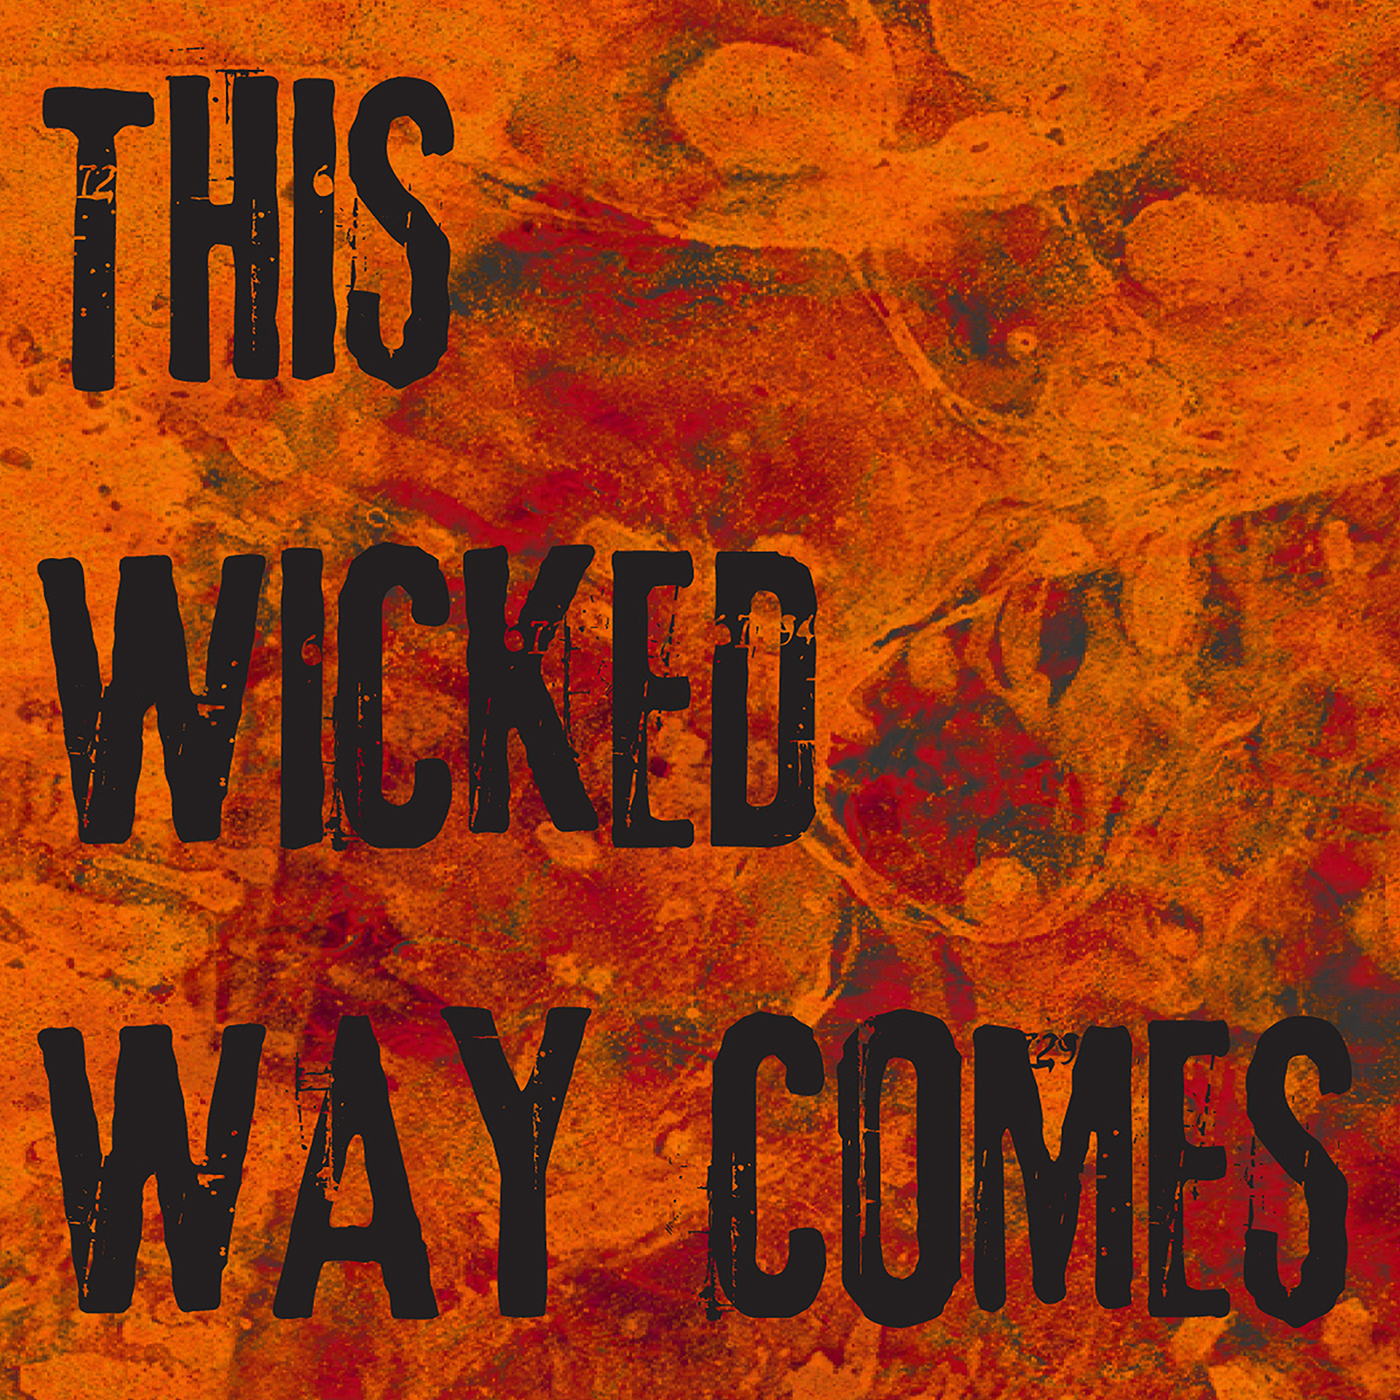 This Wicked Way Comes - Episode 1 - Maris and Warble of the Wasteland